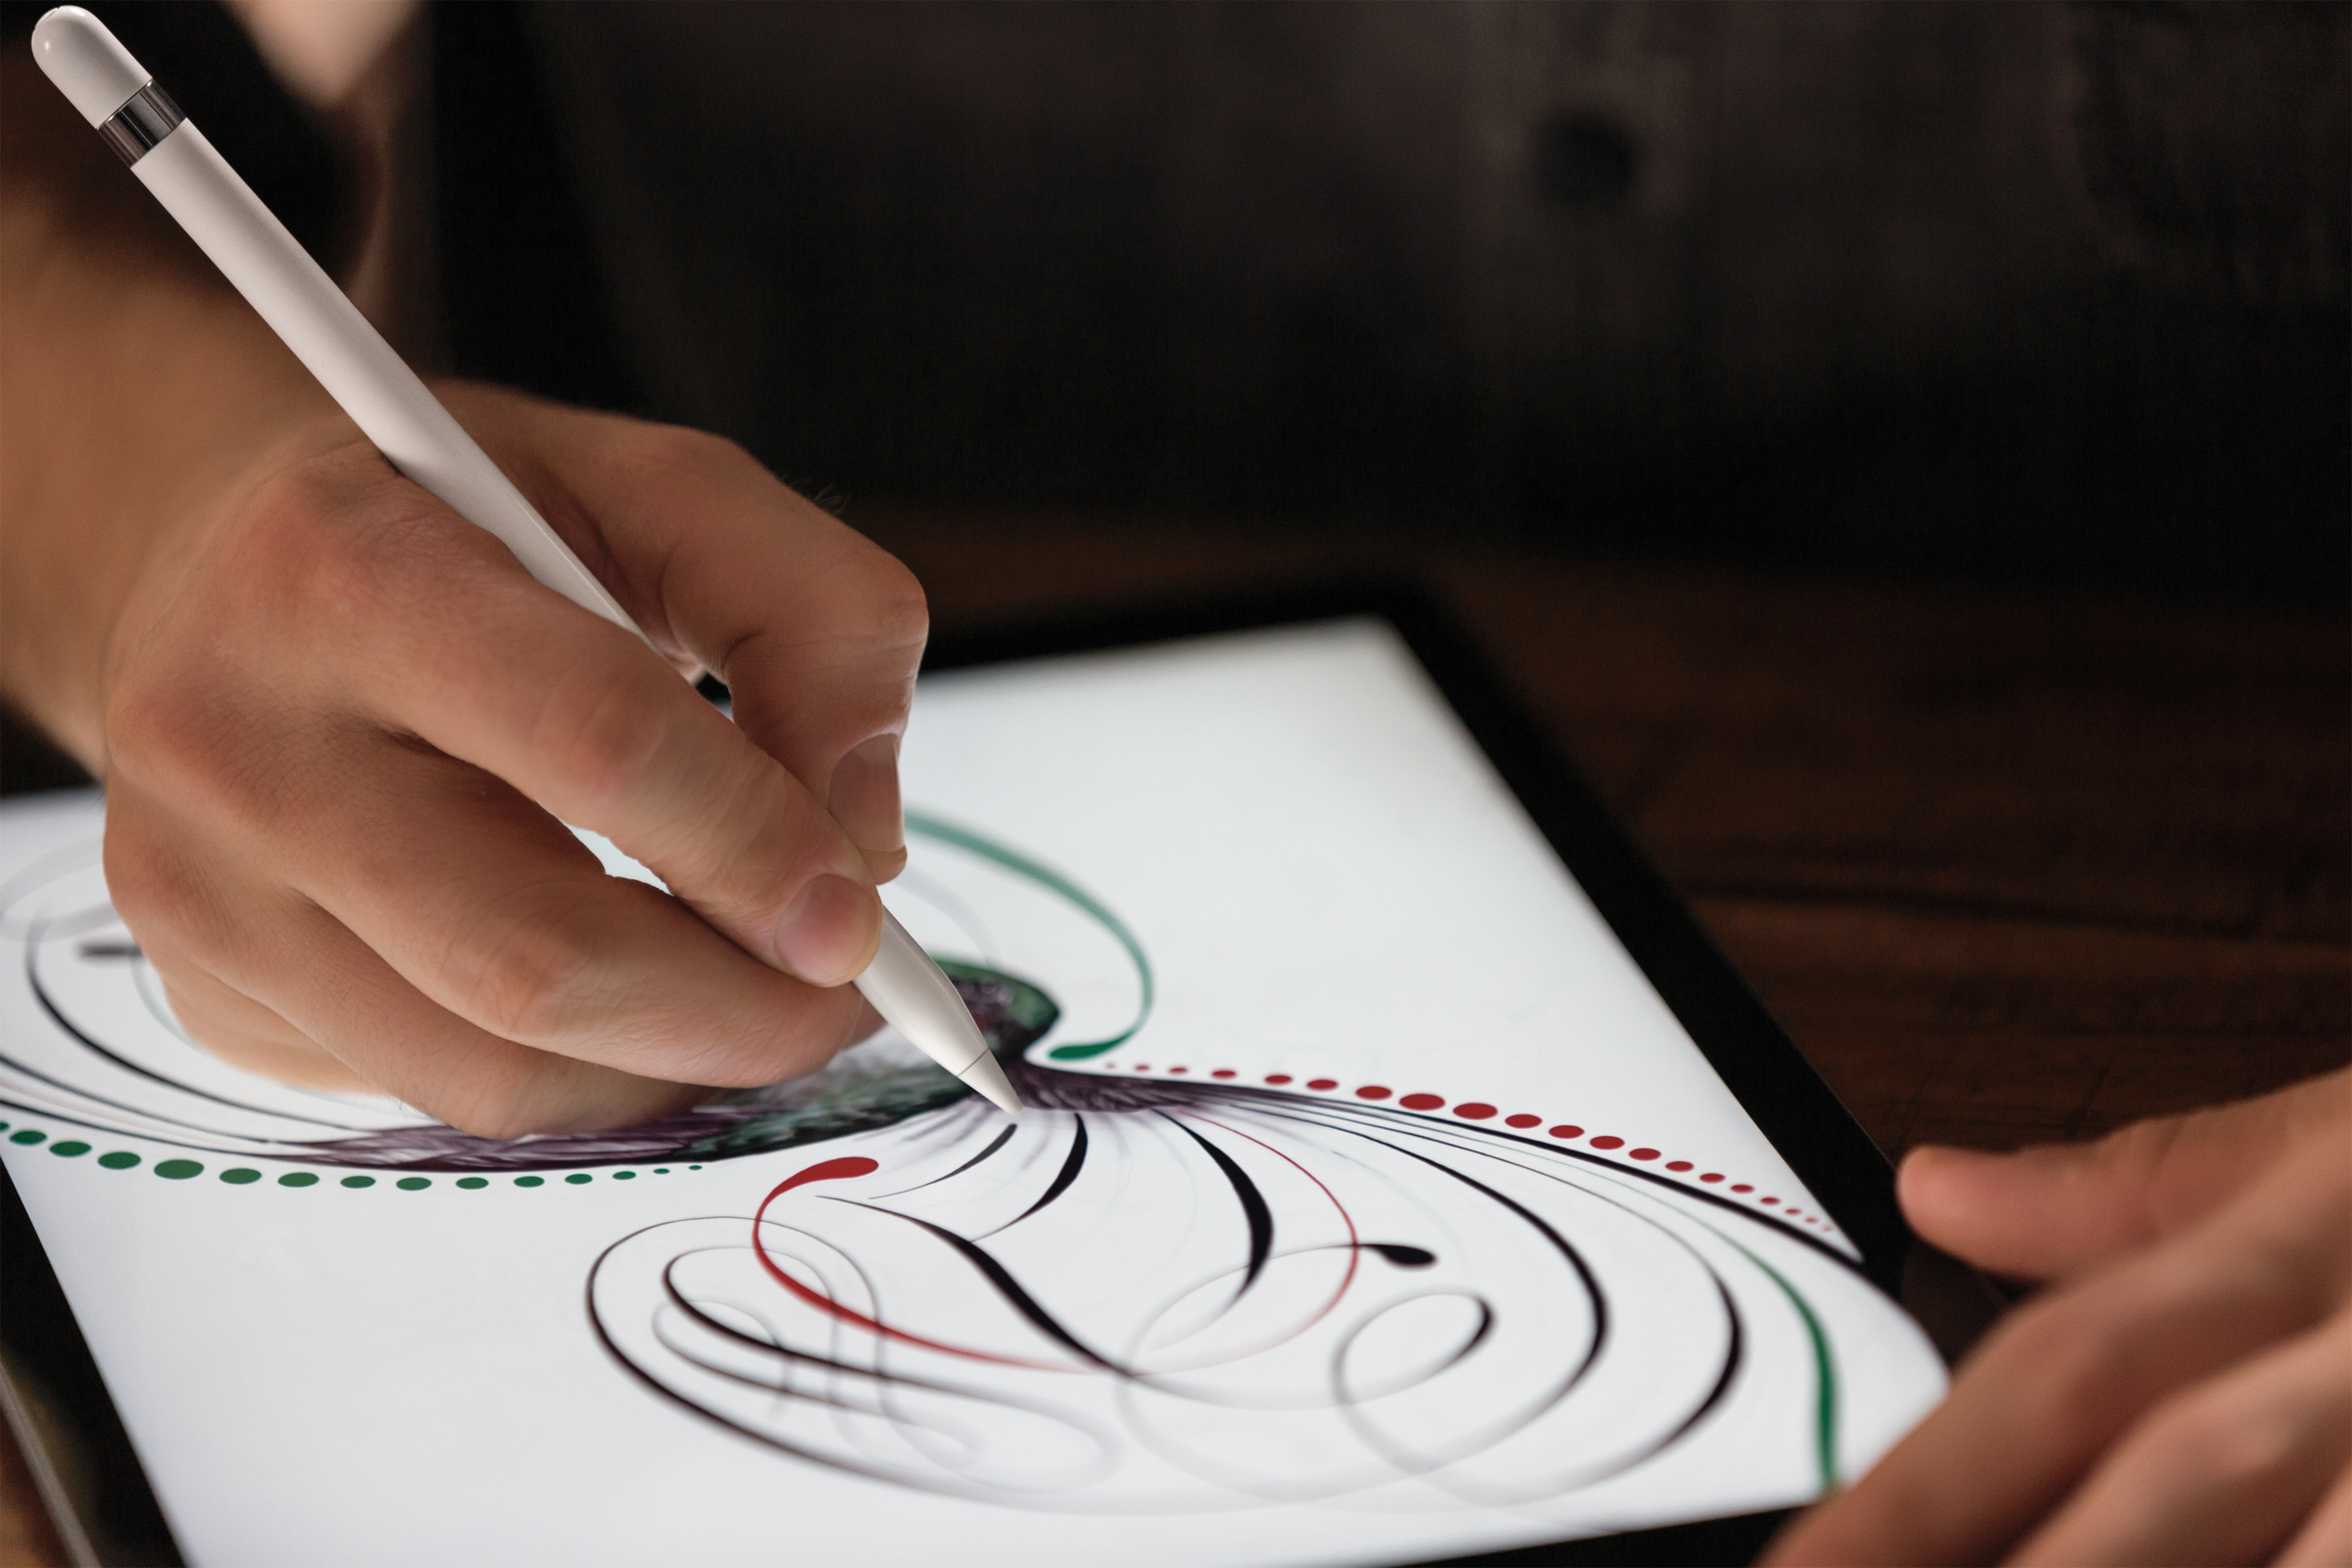 Special event: Apple launches iPad Pro, with 12.9-inch screen